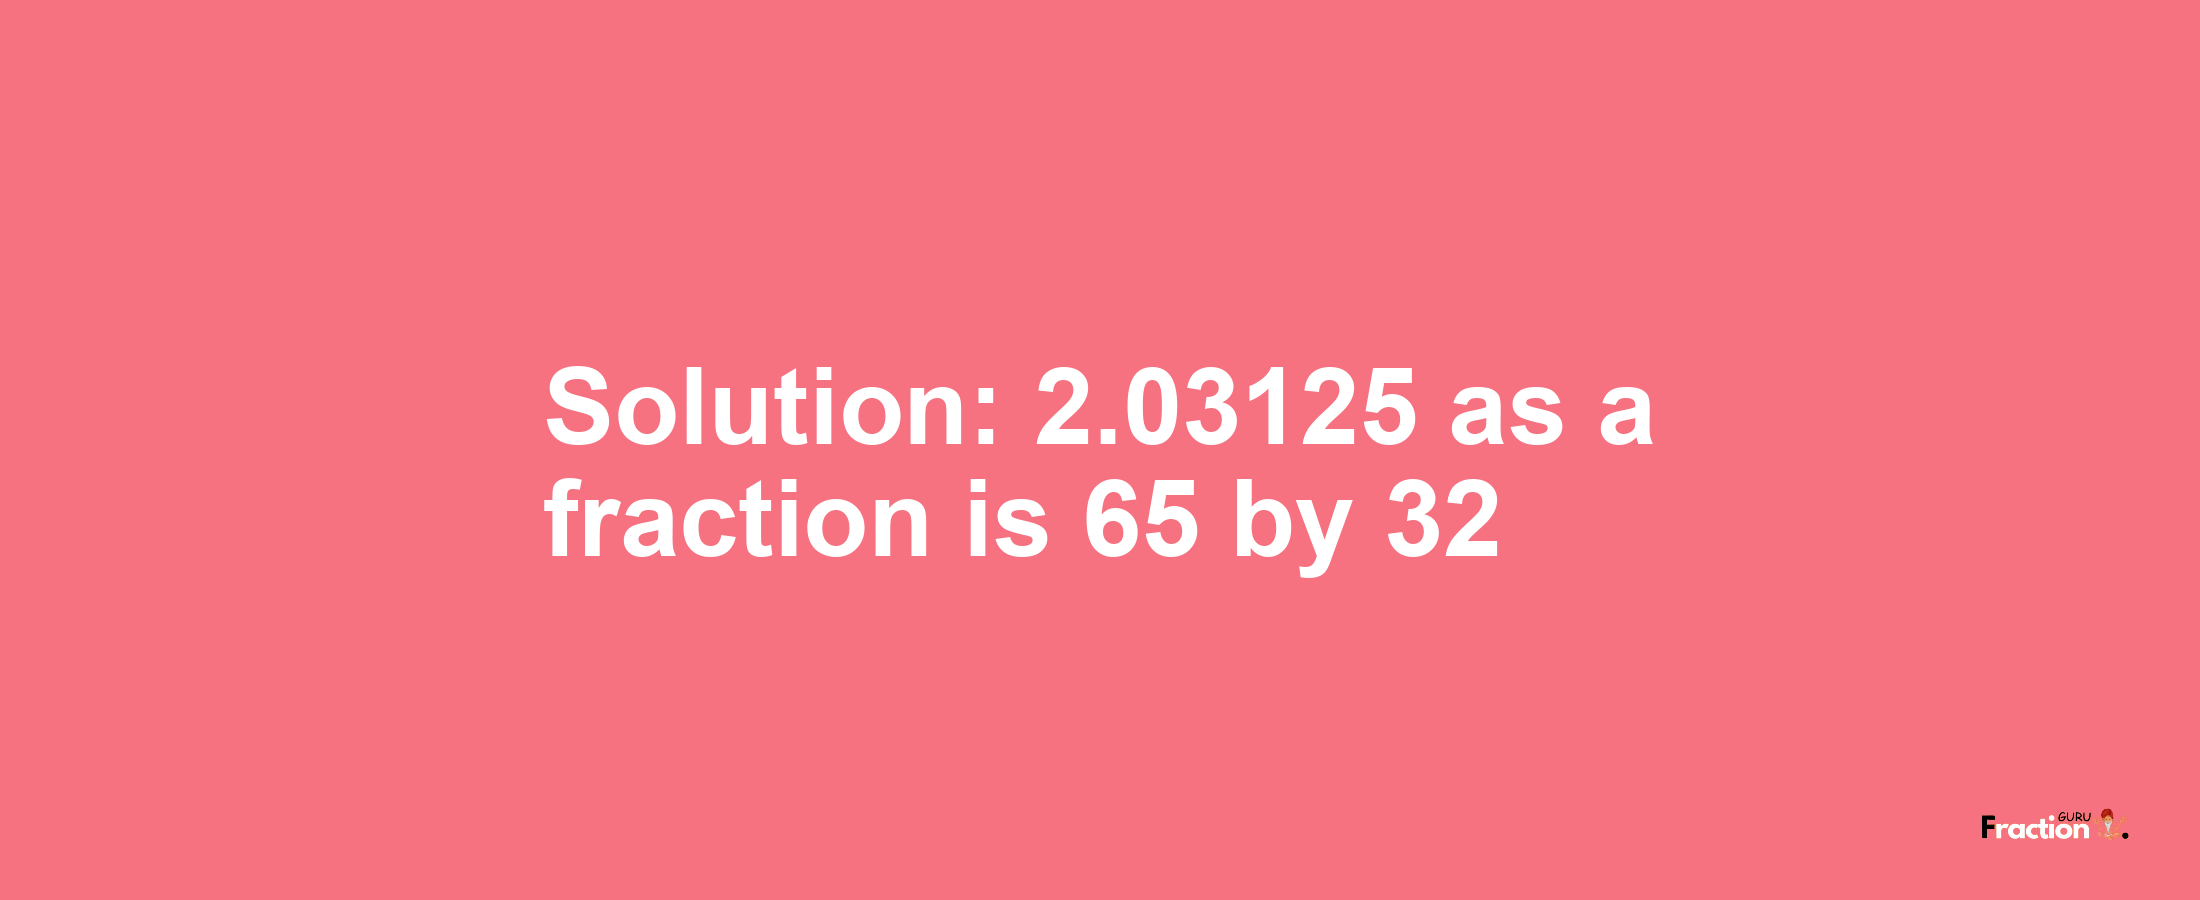 Solution:2.03125 as a fraction is 65/32